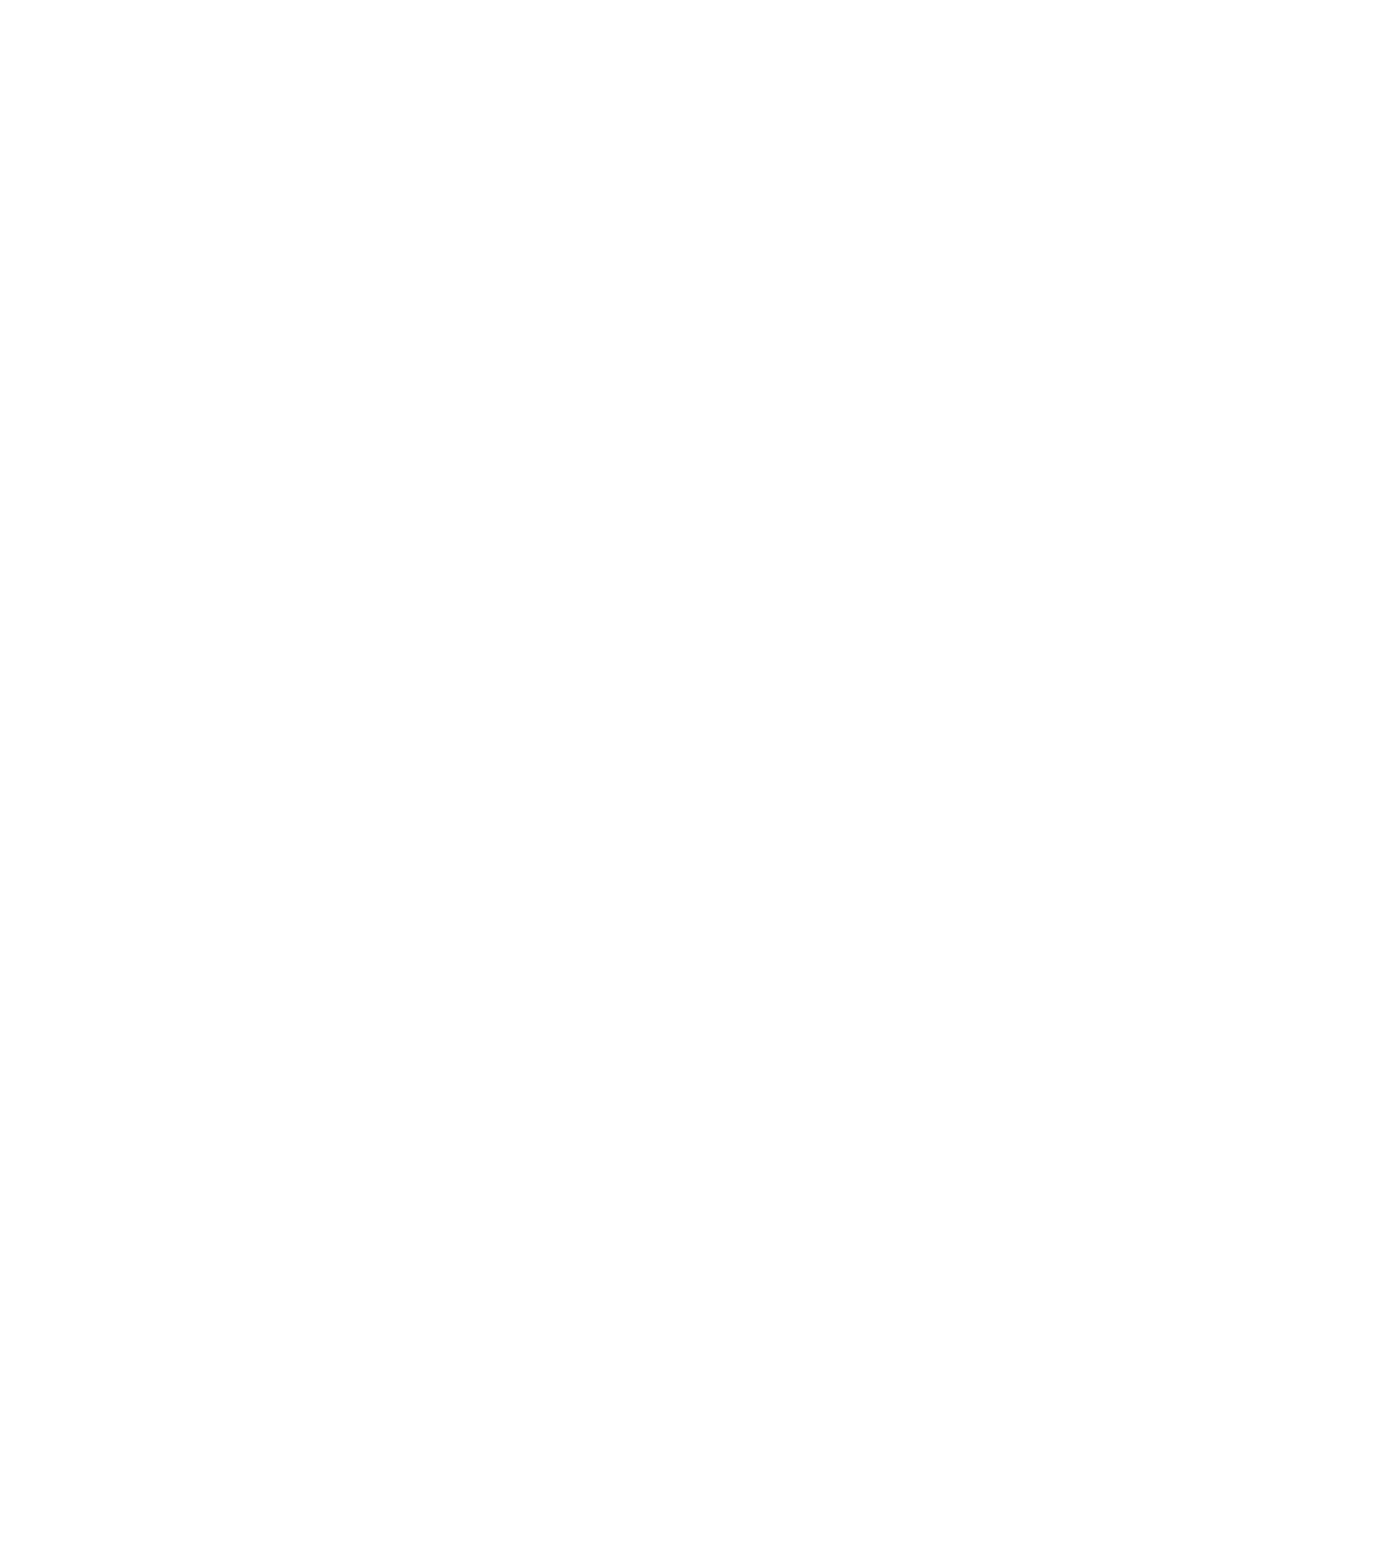 Genting Malaysia Berhad logo pour fonds sombres (PNG transparent)